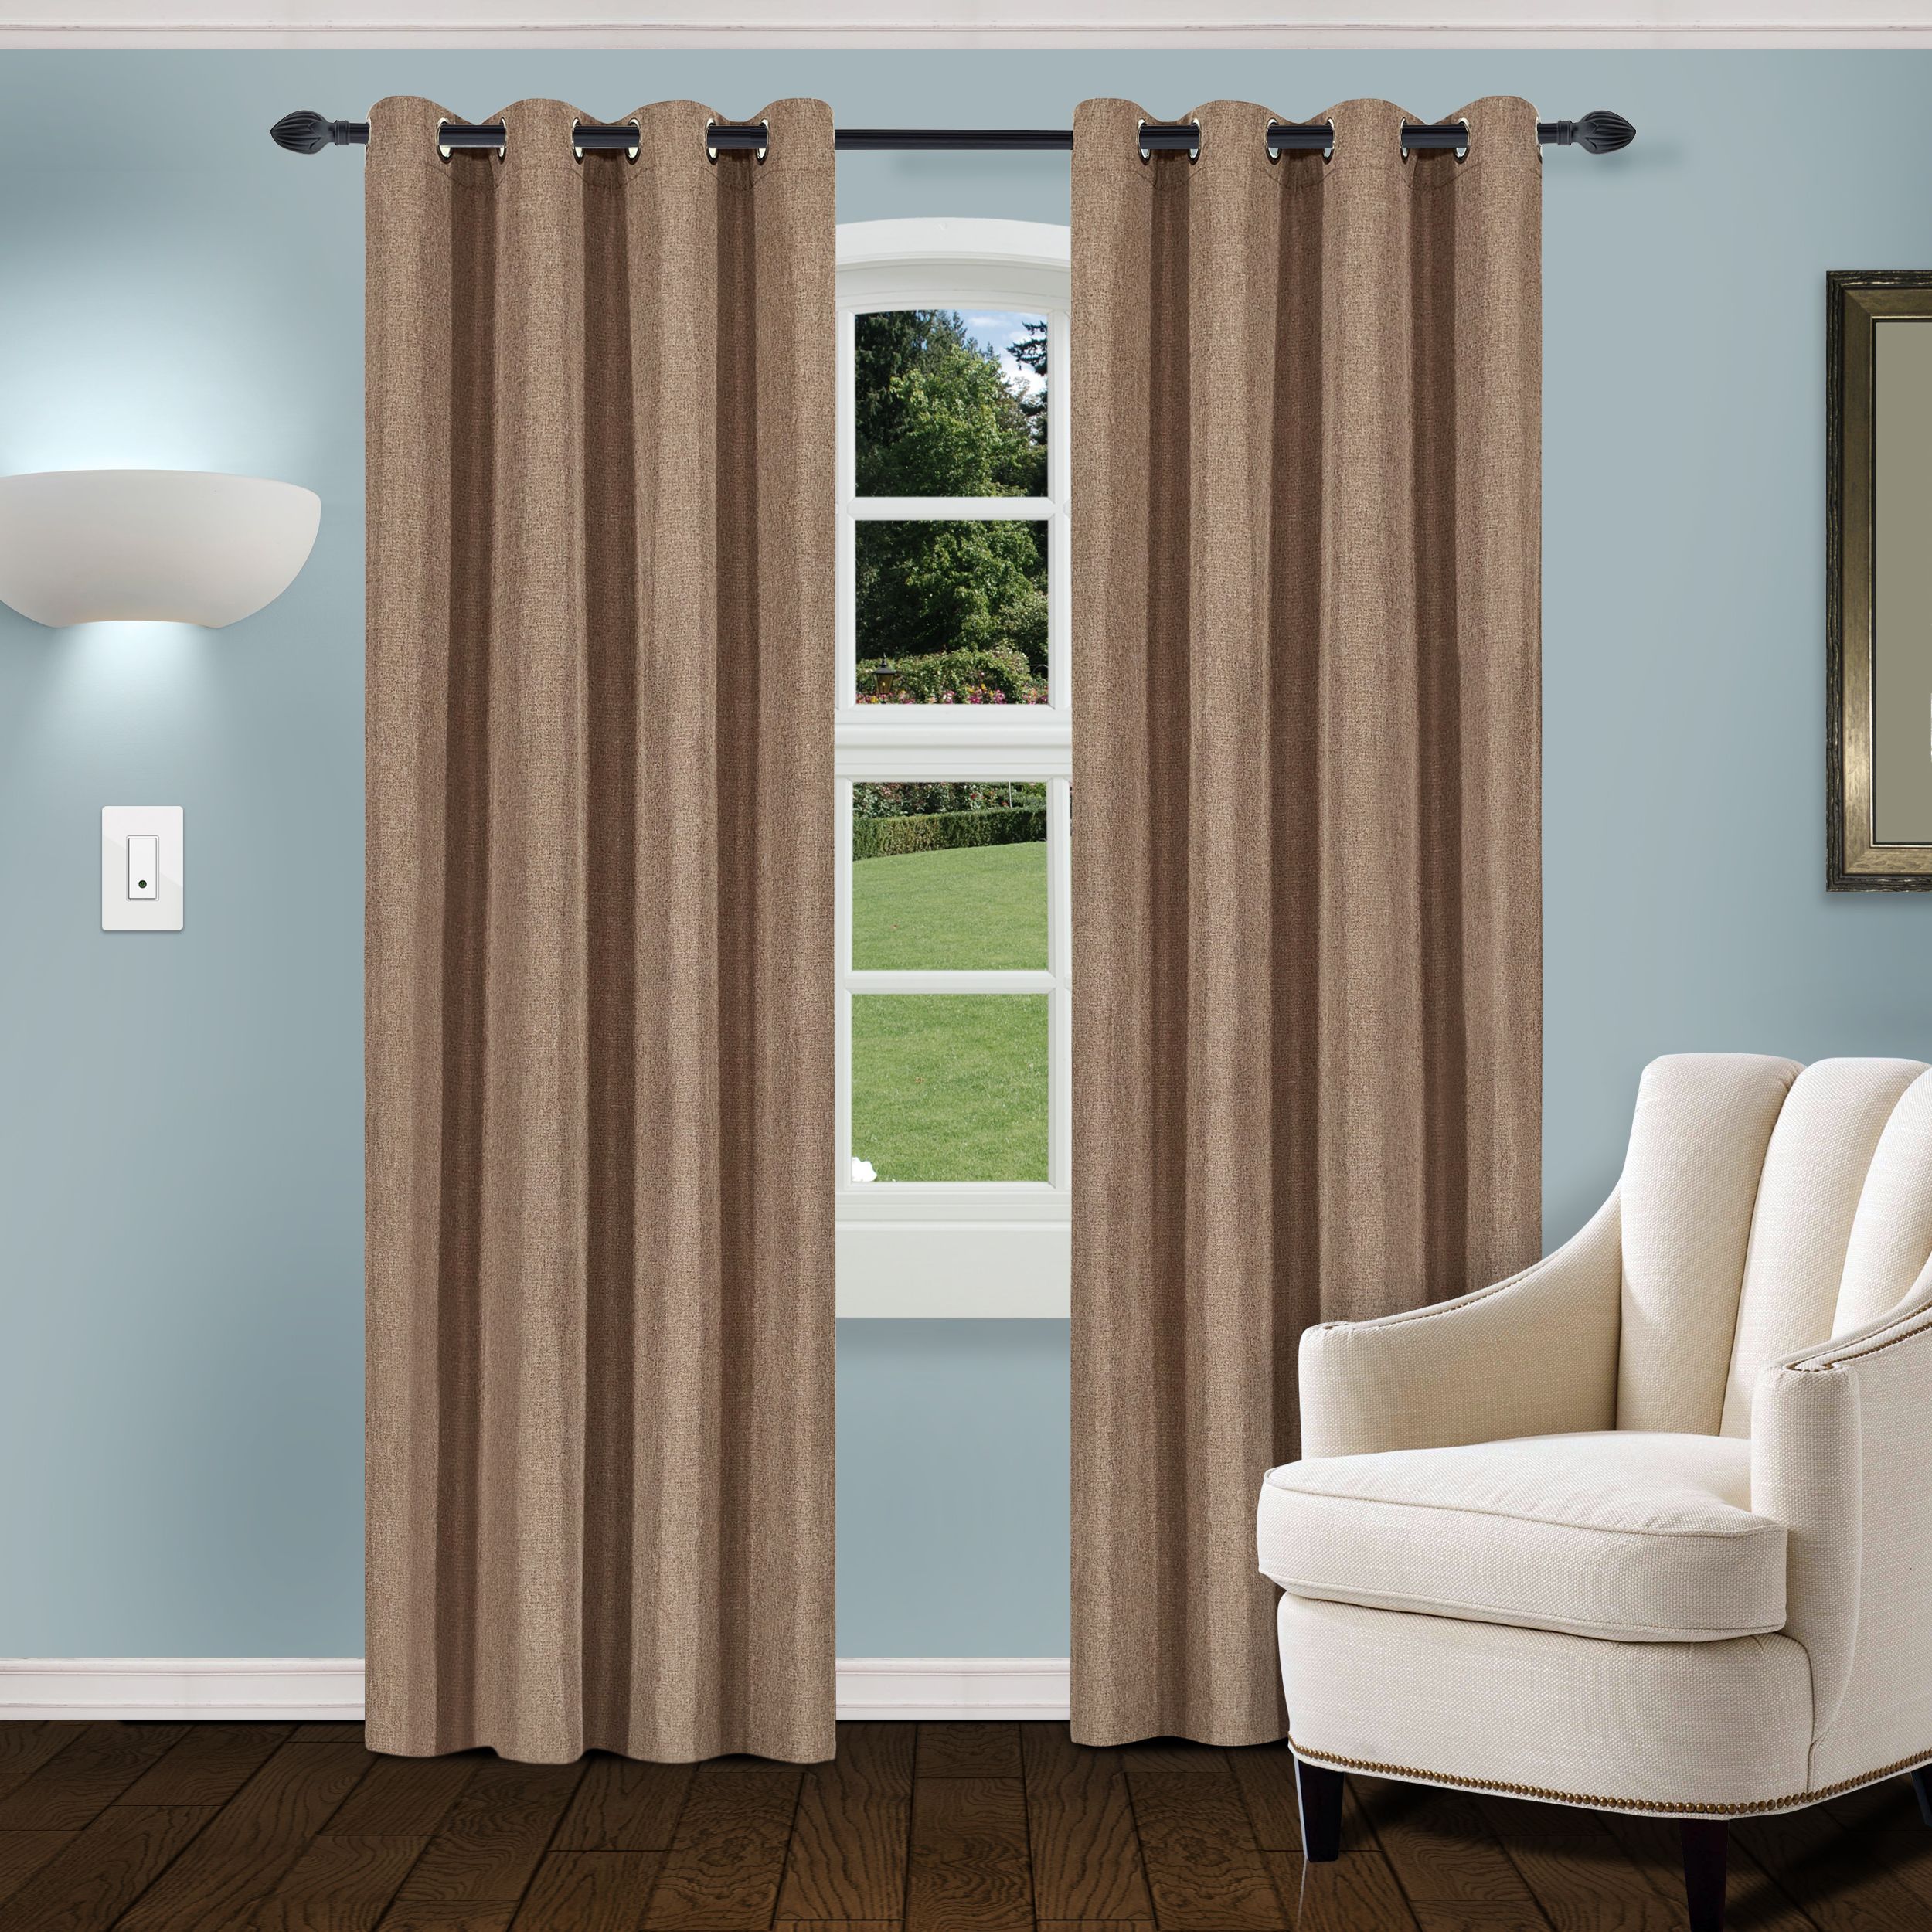 Superior Leaves Insulated Thermal Blackout Grommet Curtain Panel Pairs In Favorite Superior Linen Textured Blackout Curtain Set Of 2 With Grommet Top Header (View 18 of 20)